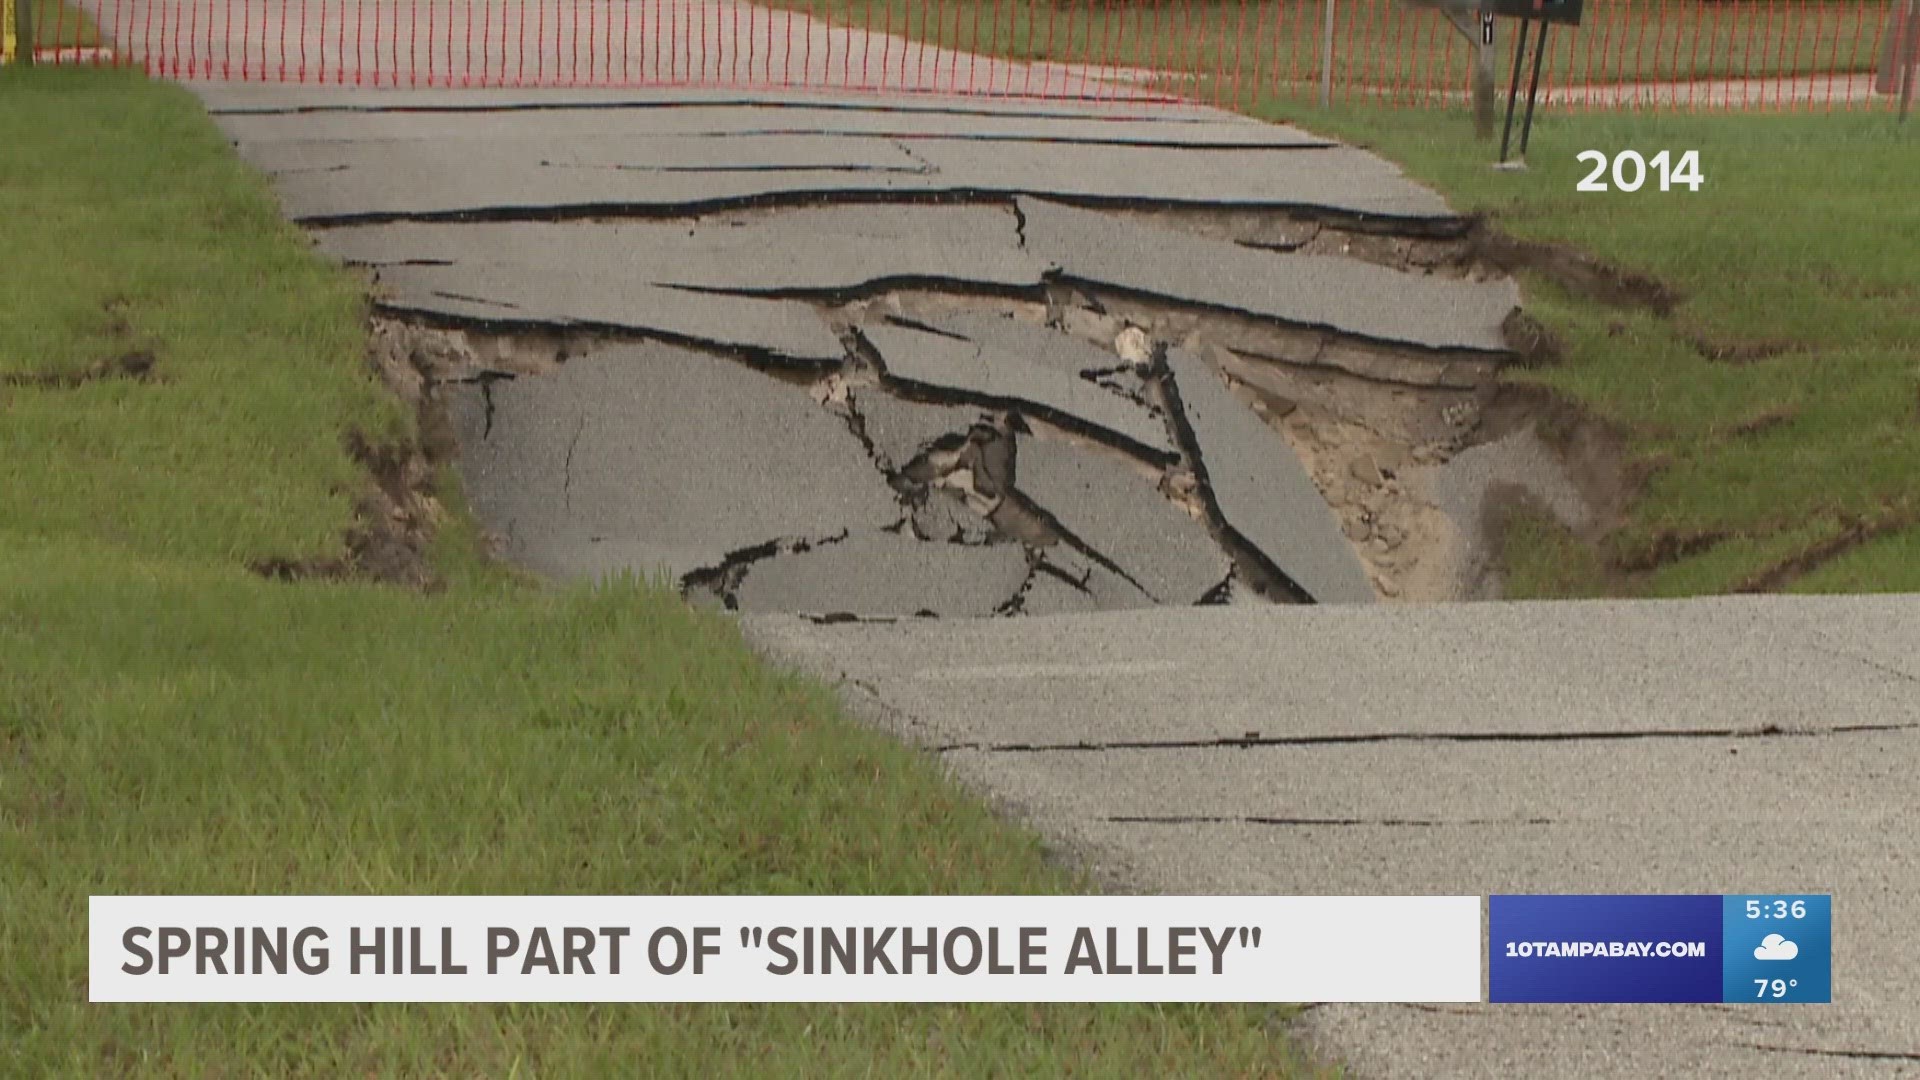 Sinkholes happen in Spring Hill more often than any other city in Florida.